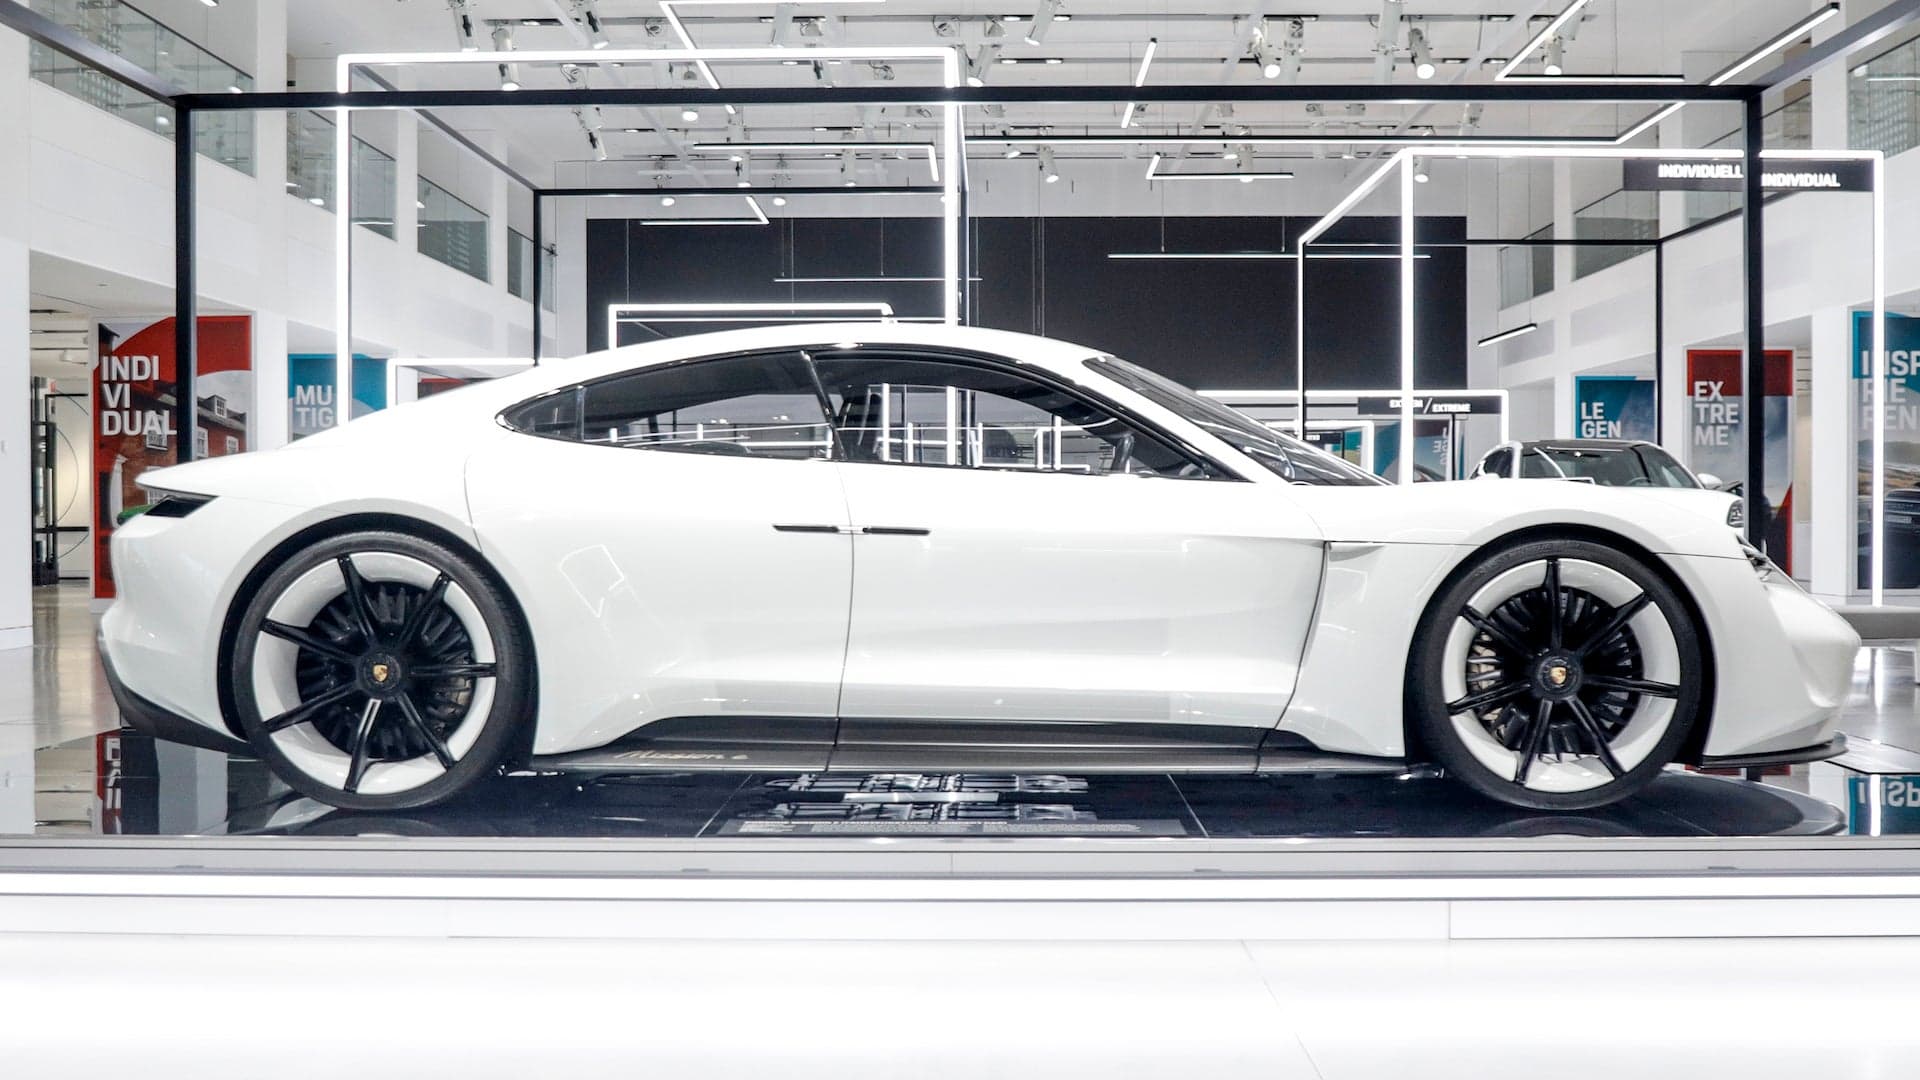 Porsche Preps Charging Stations Across Europe and US for Its All-Electric Taycan